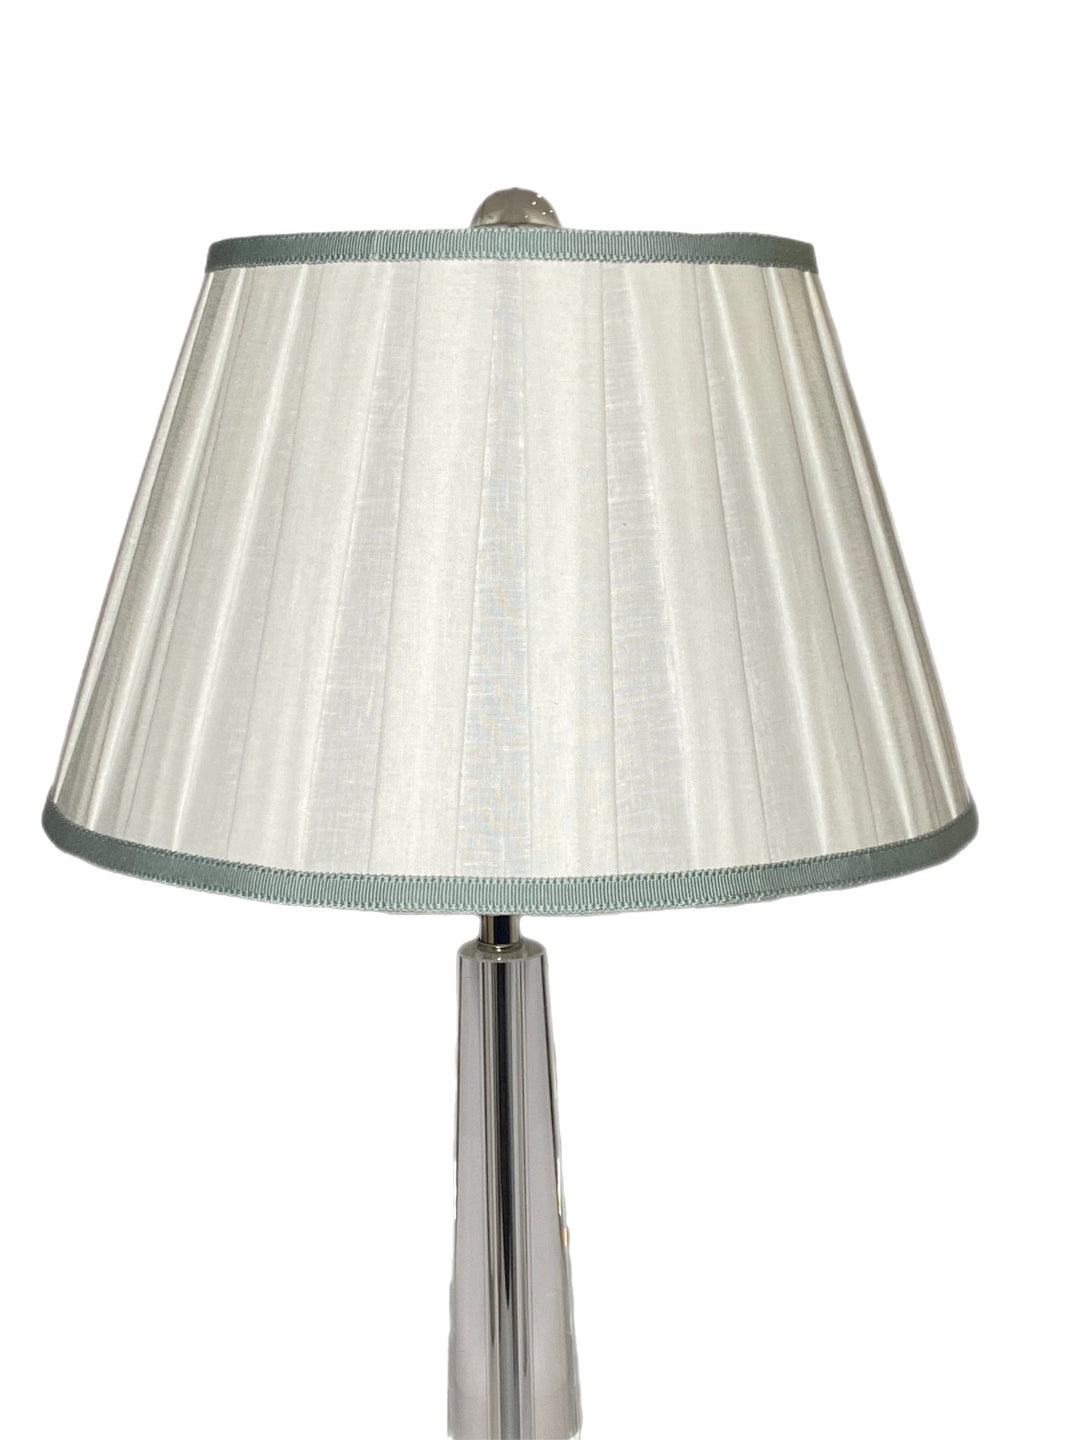 Box Pleat Linen Pembroke Lamp Shades Curated -Available in Five Sizes + Add Custom Trim - Lux Lamp Shades